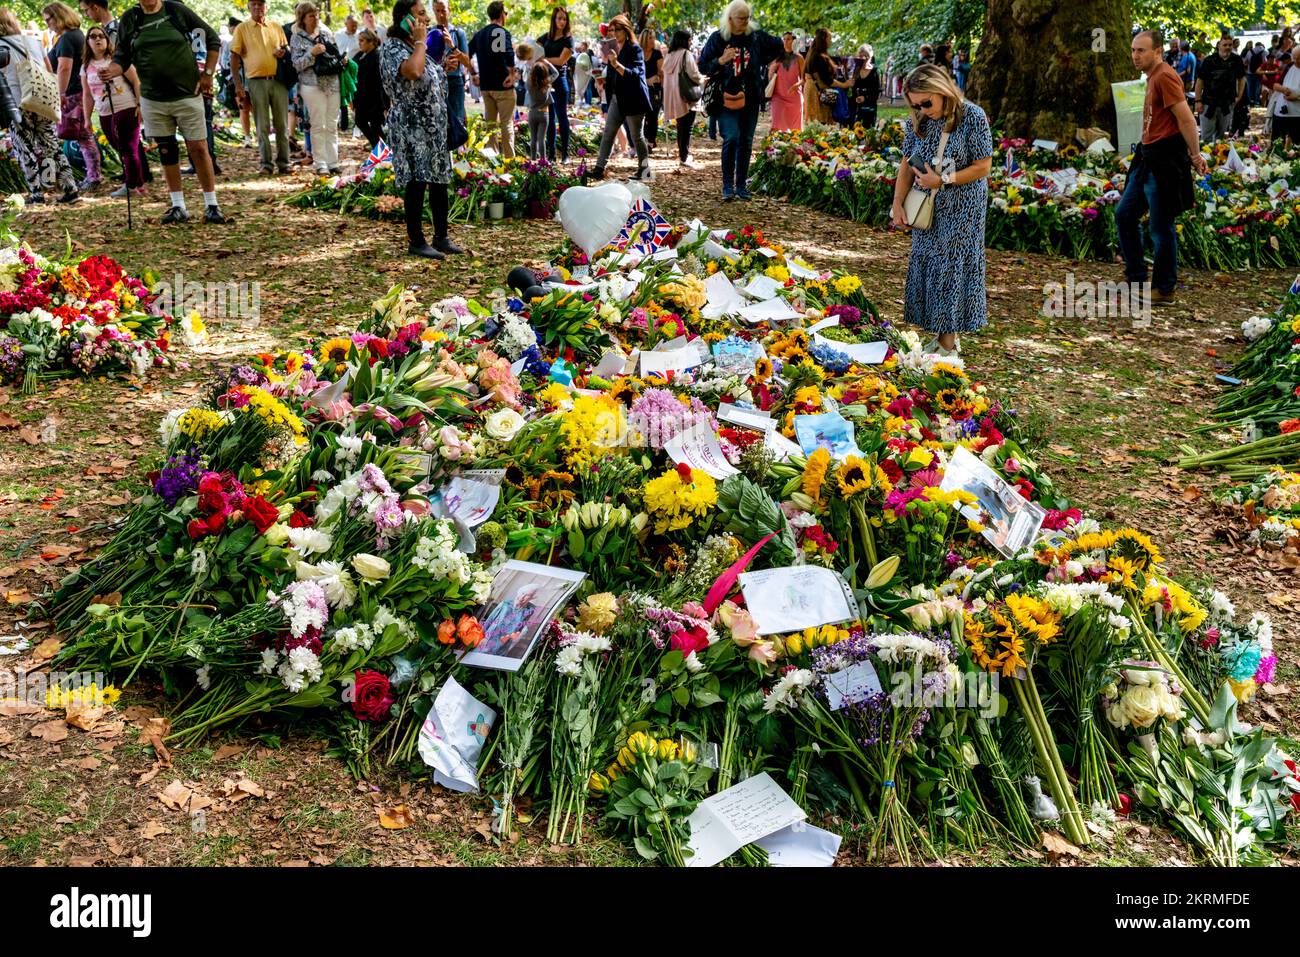 British People Looking At The Floral Tributes For Queen Elizabeth II In The Floral Tribute Garden In Green Park, London, UK. Stock Photo